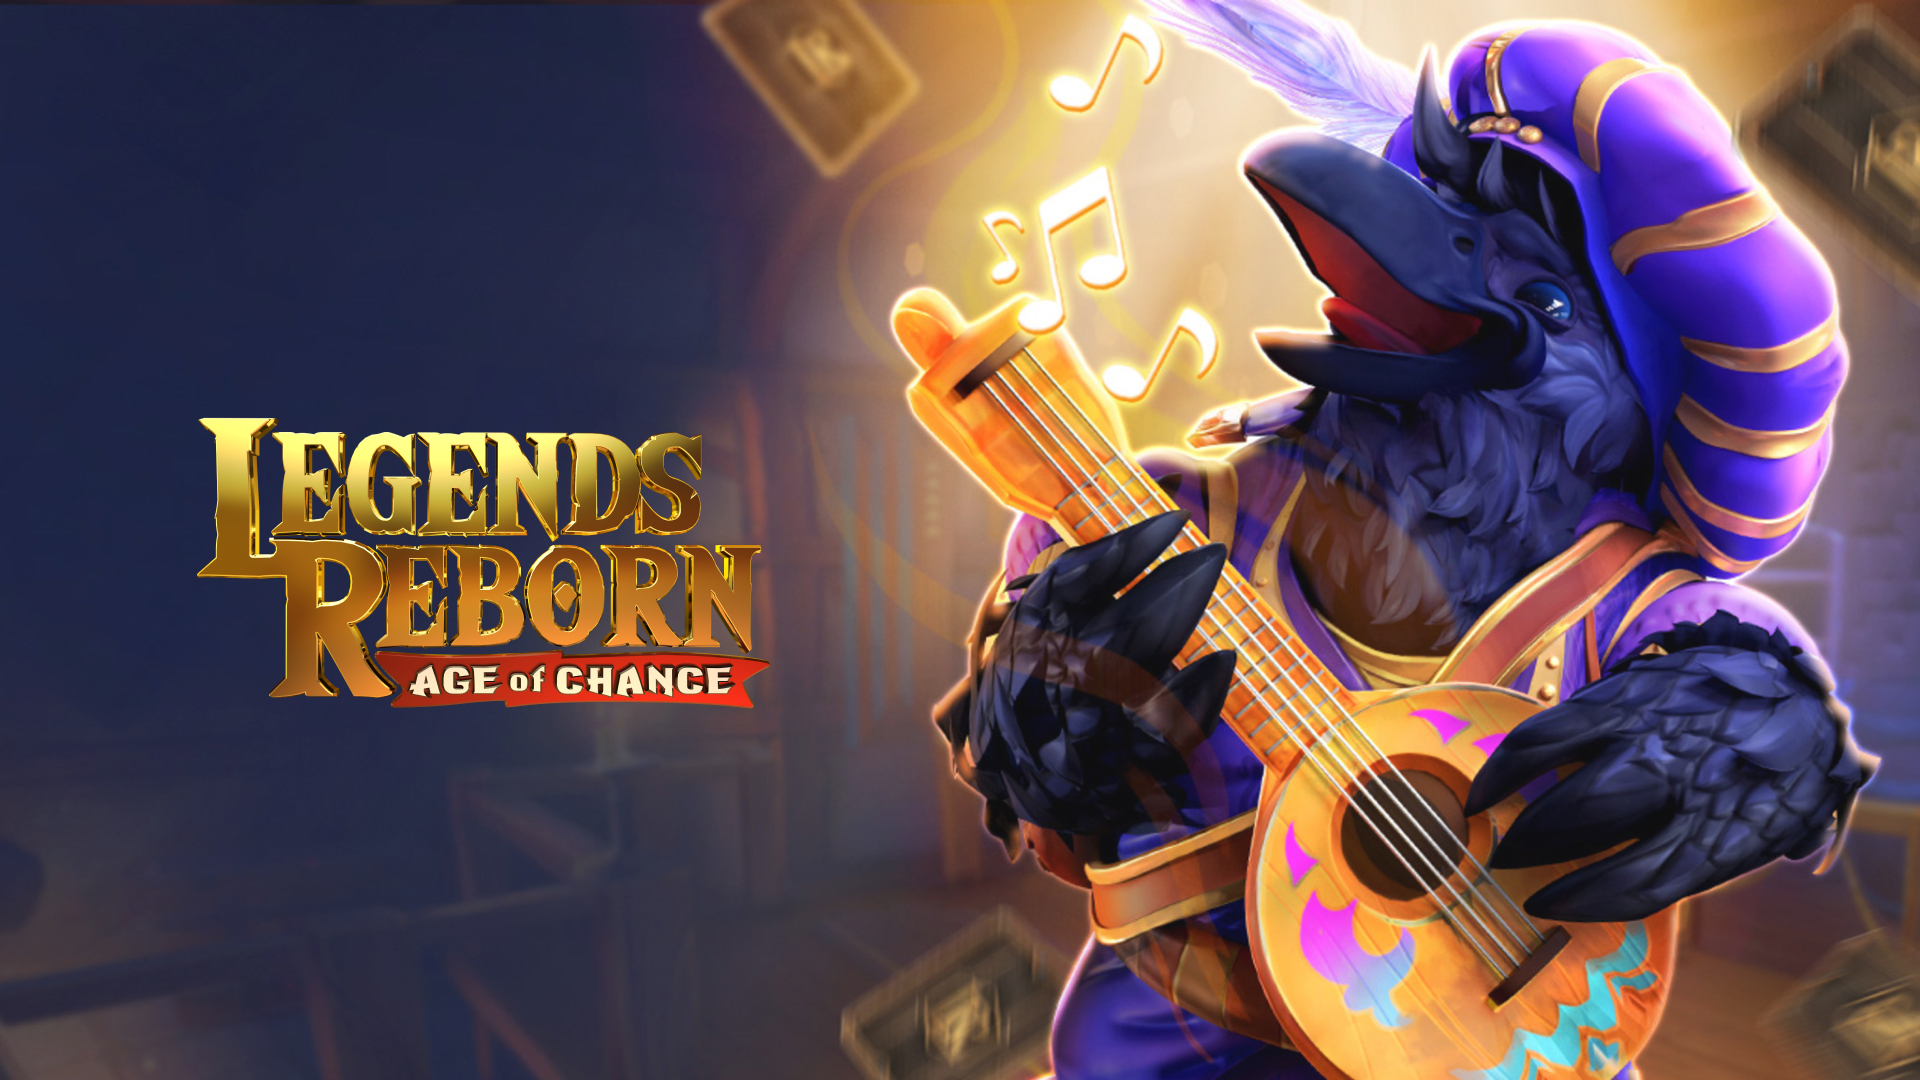 Legends Reborn is a web3 tcg that's preparing for launch from Gala Games.